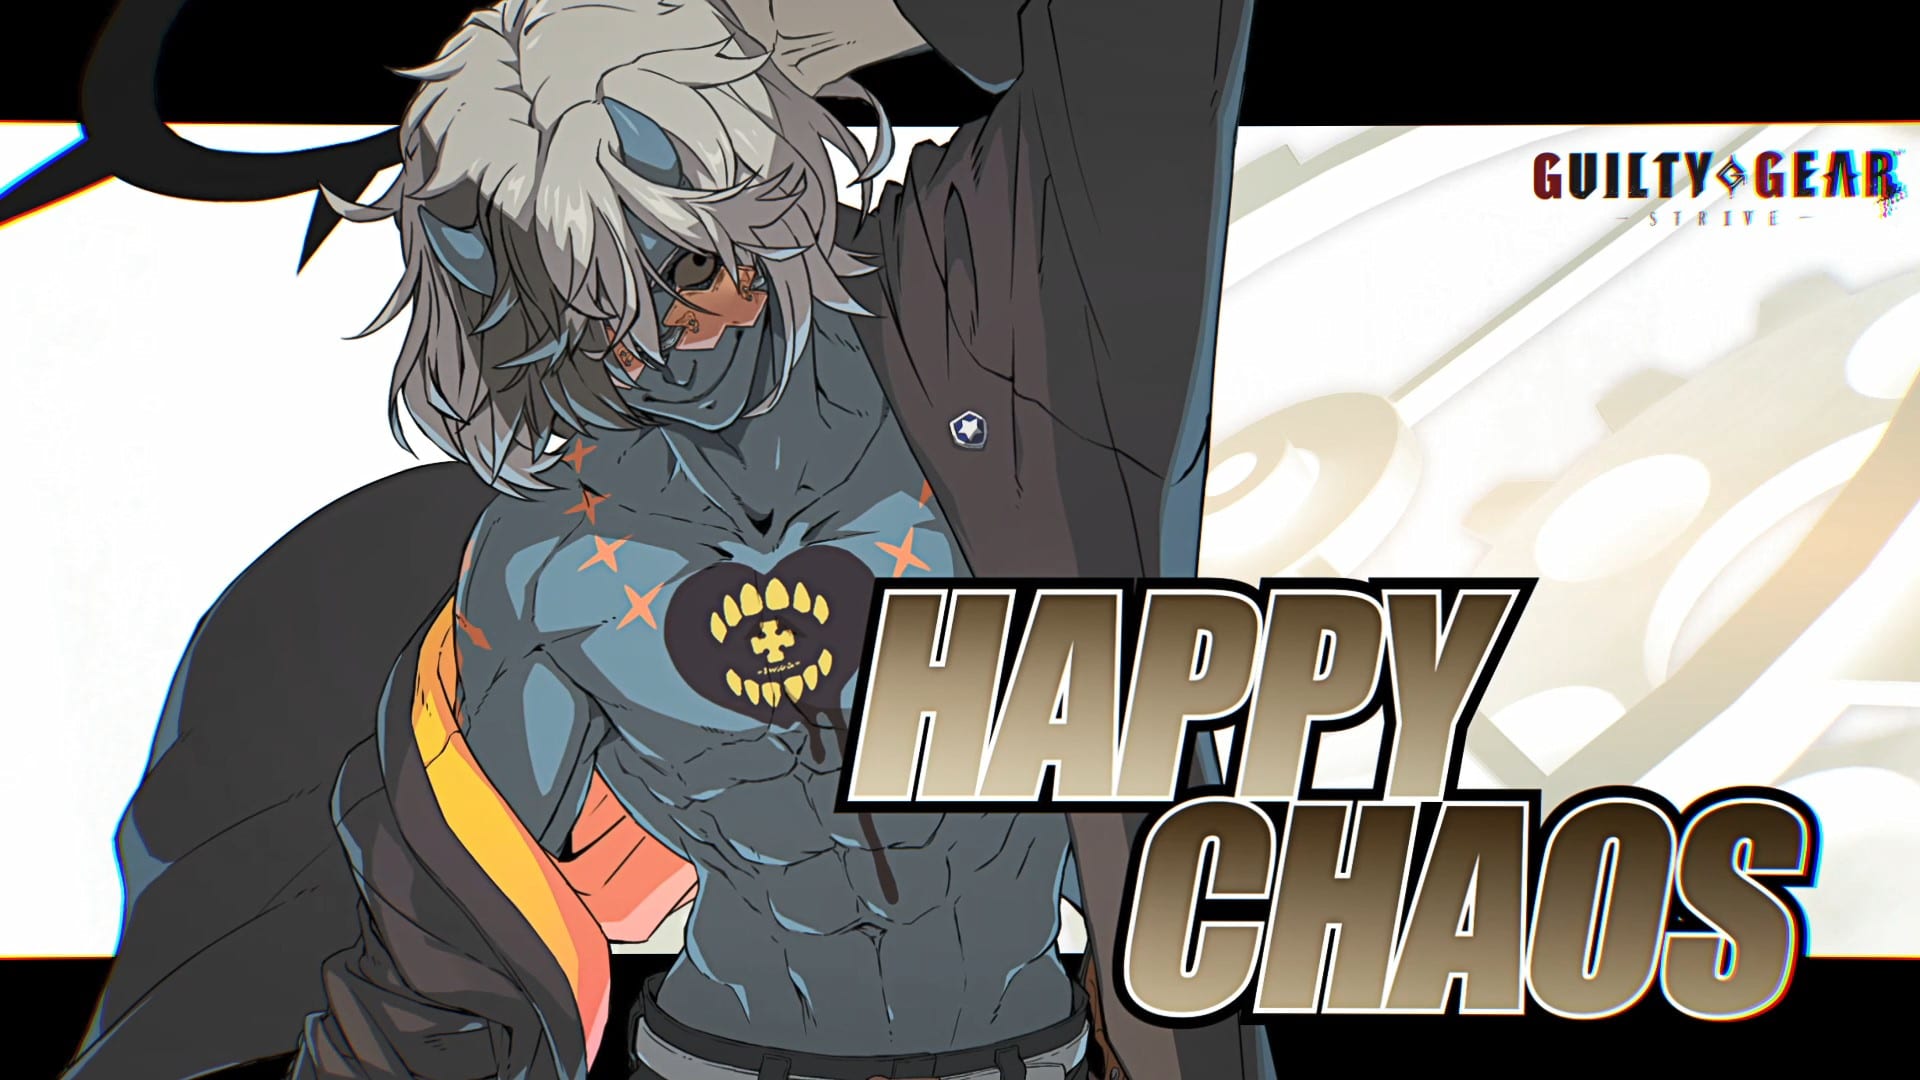 The unpredictable Happy Chaos will wreak havoc on Guilty Gear - Strive thumbnail